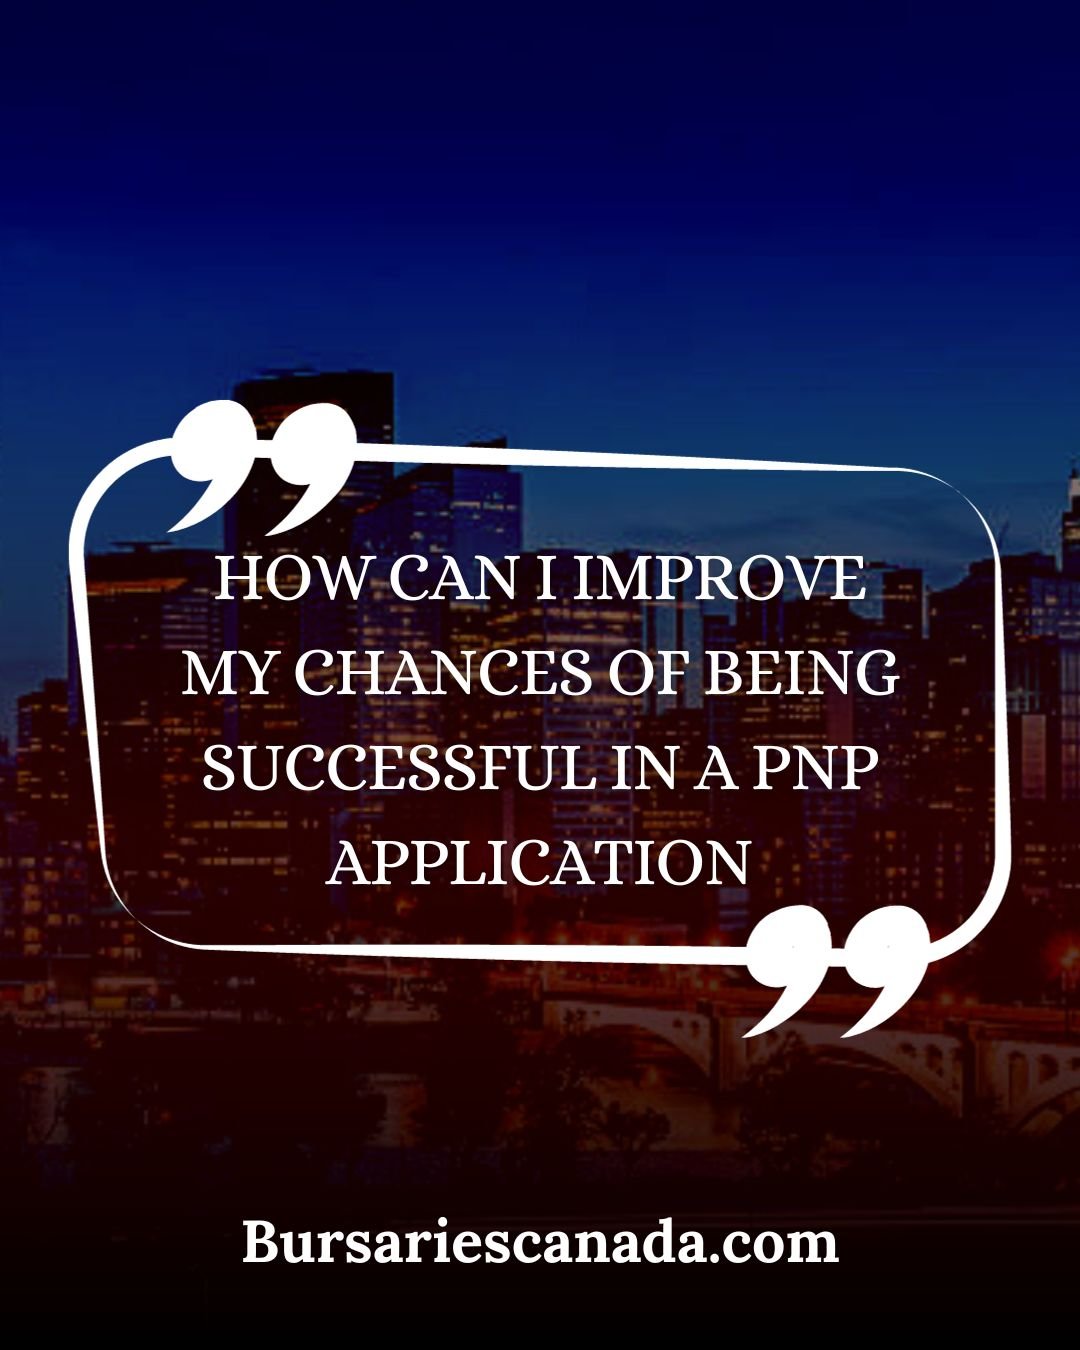 How can I improve my chances of being successful in a PNP application